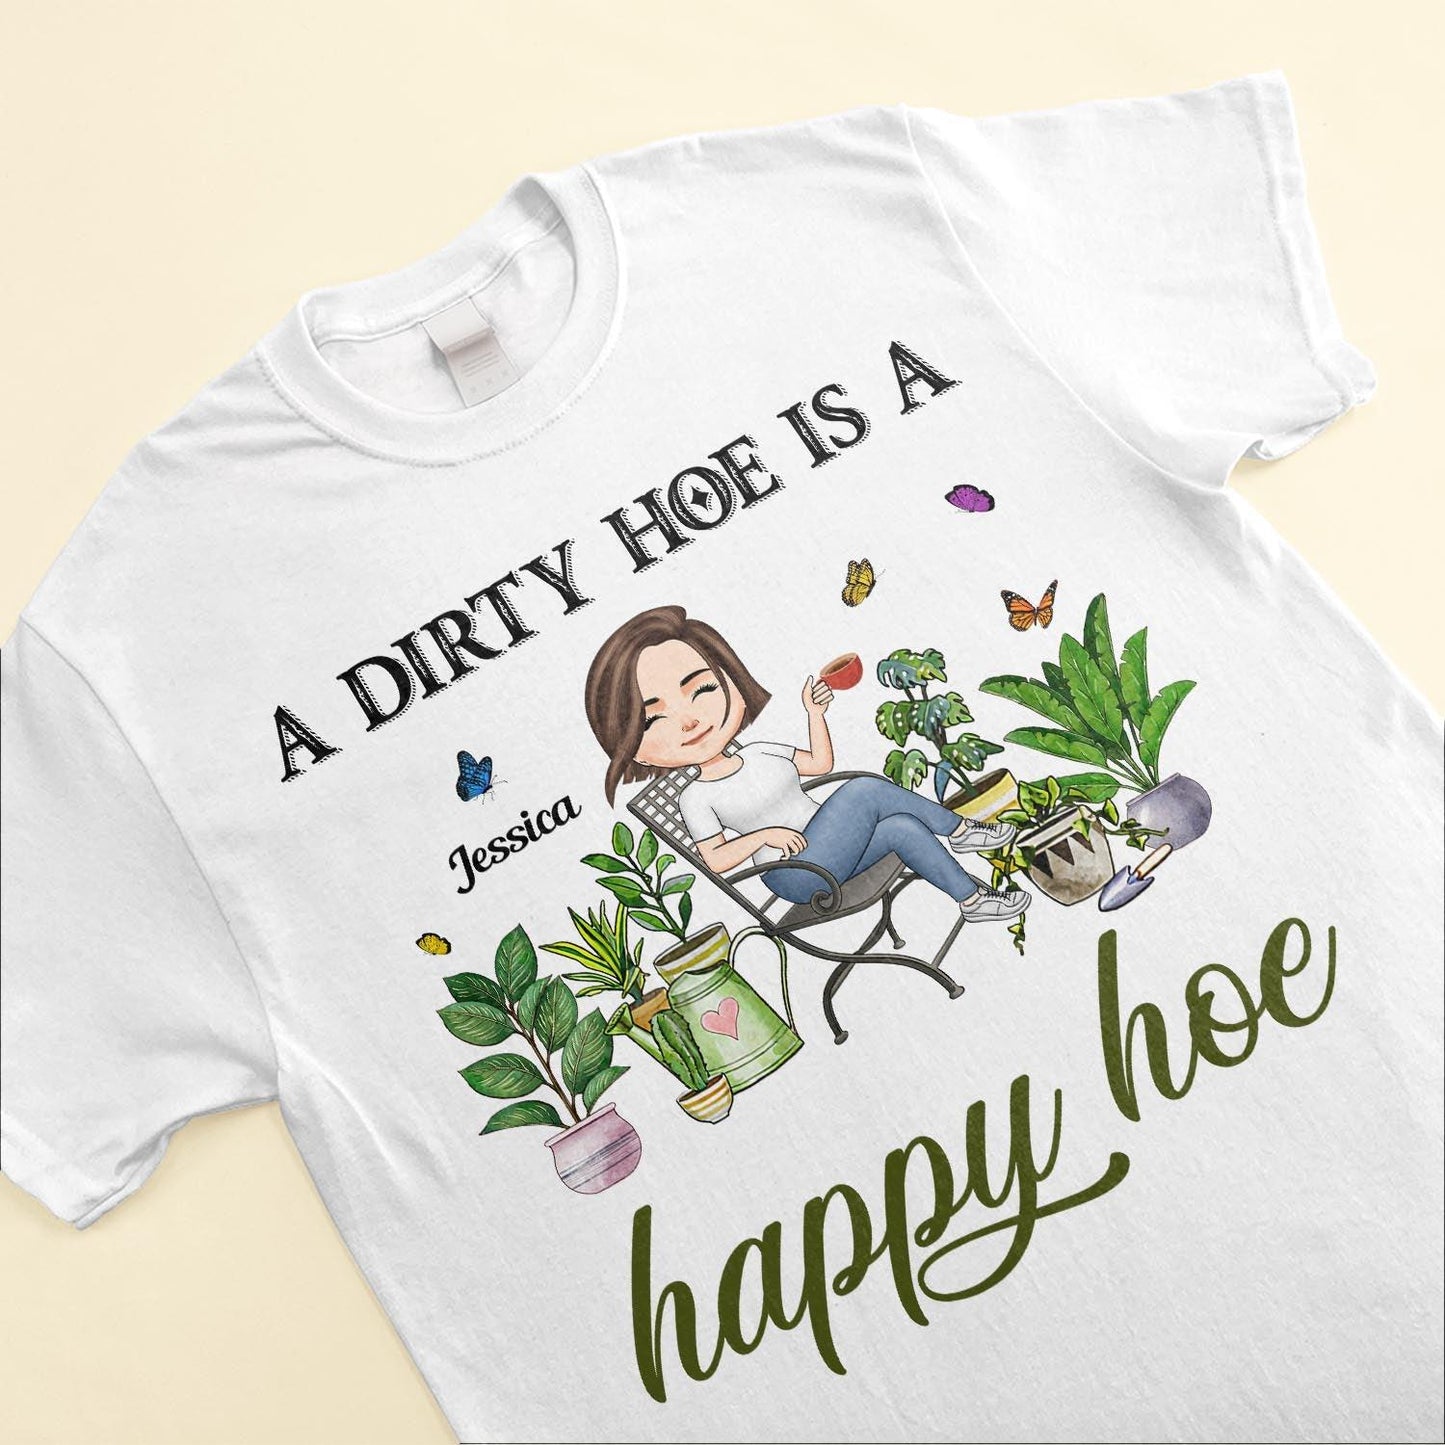 A Dirty Hoe Is A Happy Hoe - Personalized Shirt - Birthday, Funny Gift For Her, Woman, Girl, Gardening Lover